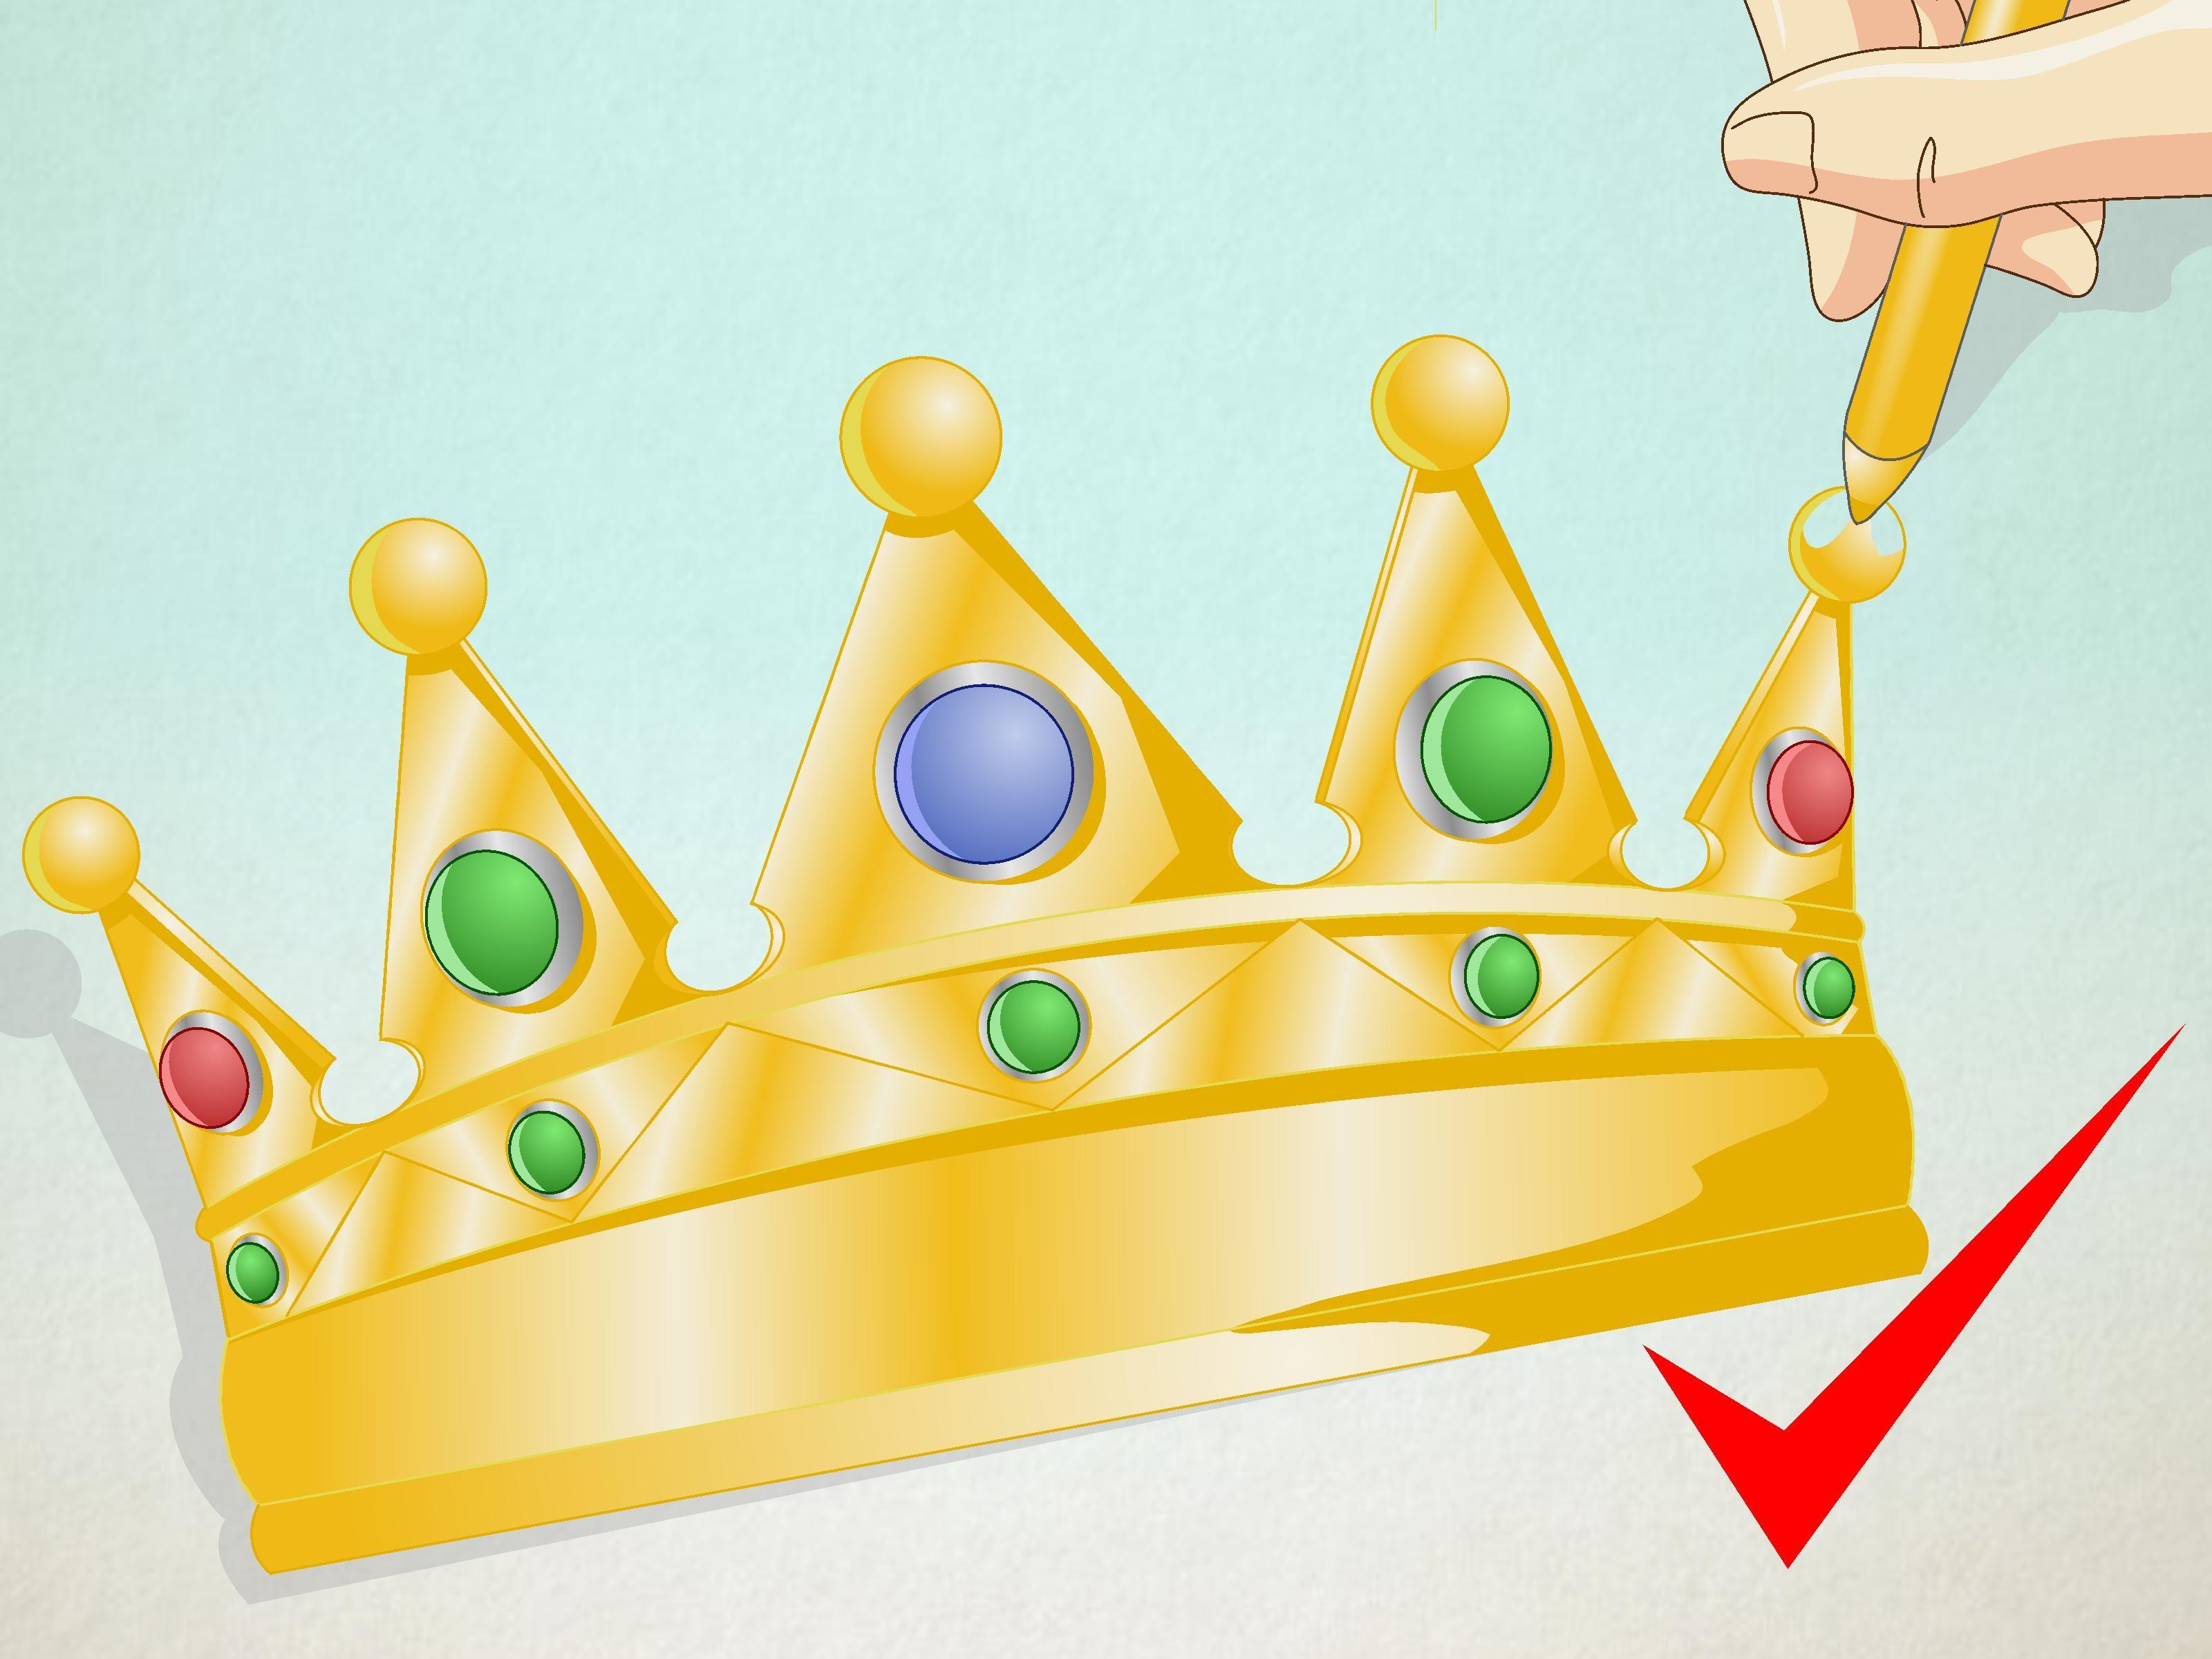 Yellow 5 Point Crown Logo - 2 Easy Ways to Draw a Crown (with Pictures) - wikiHow